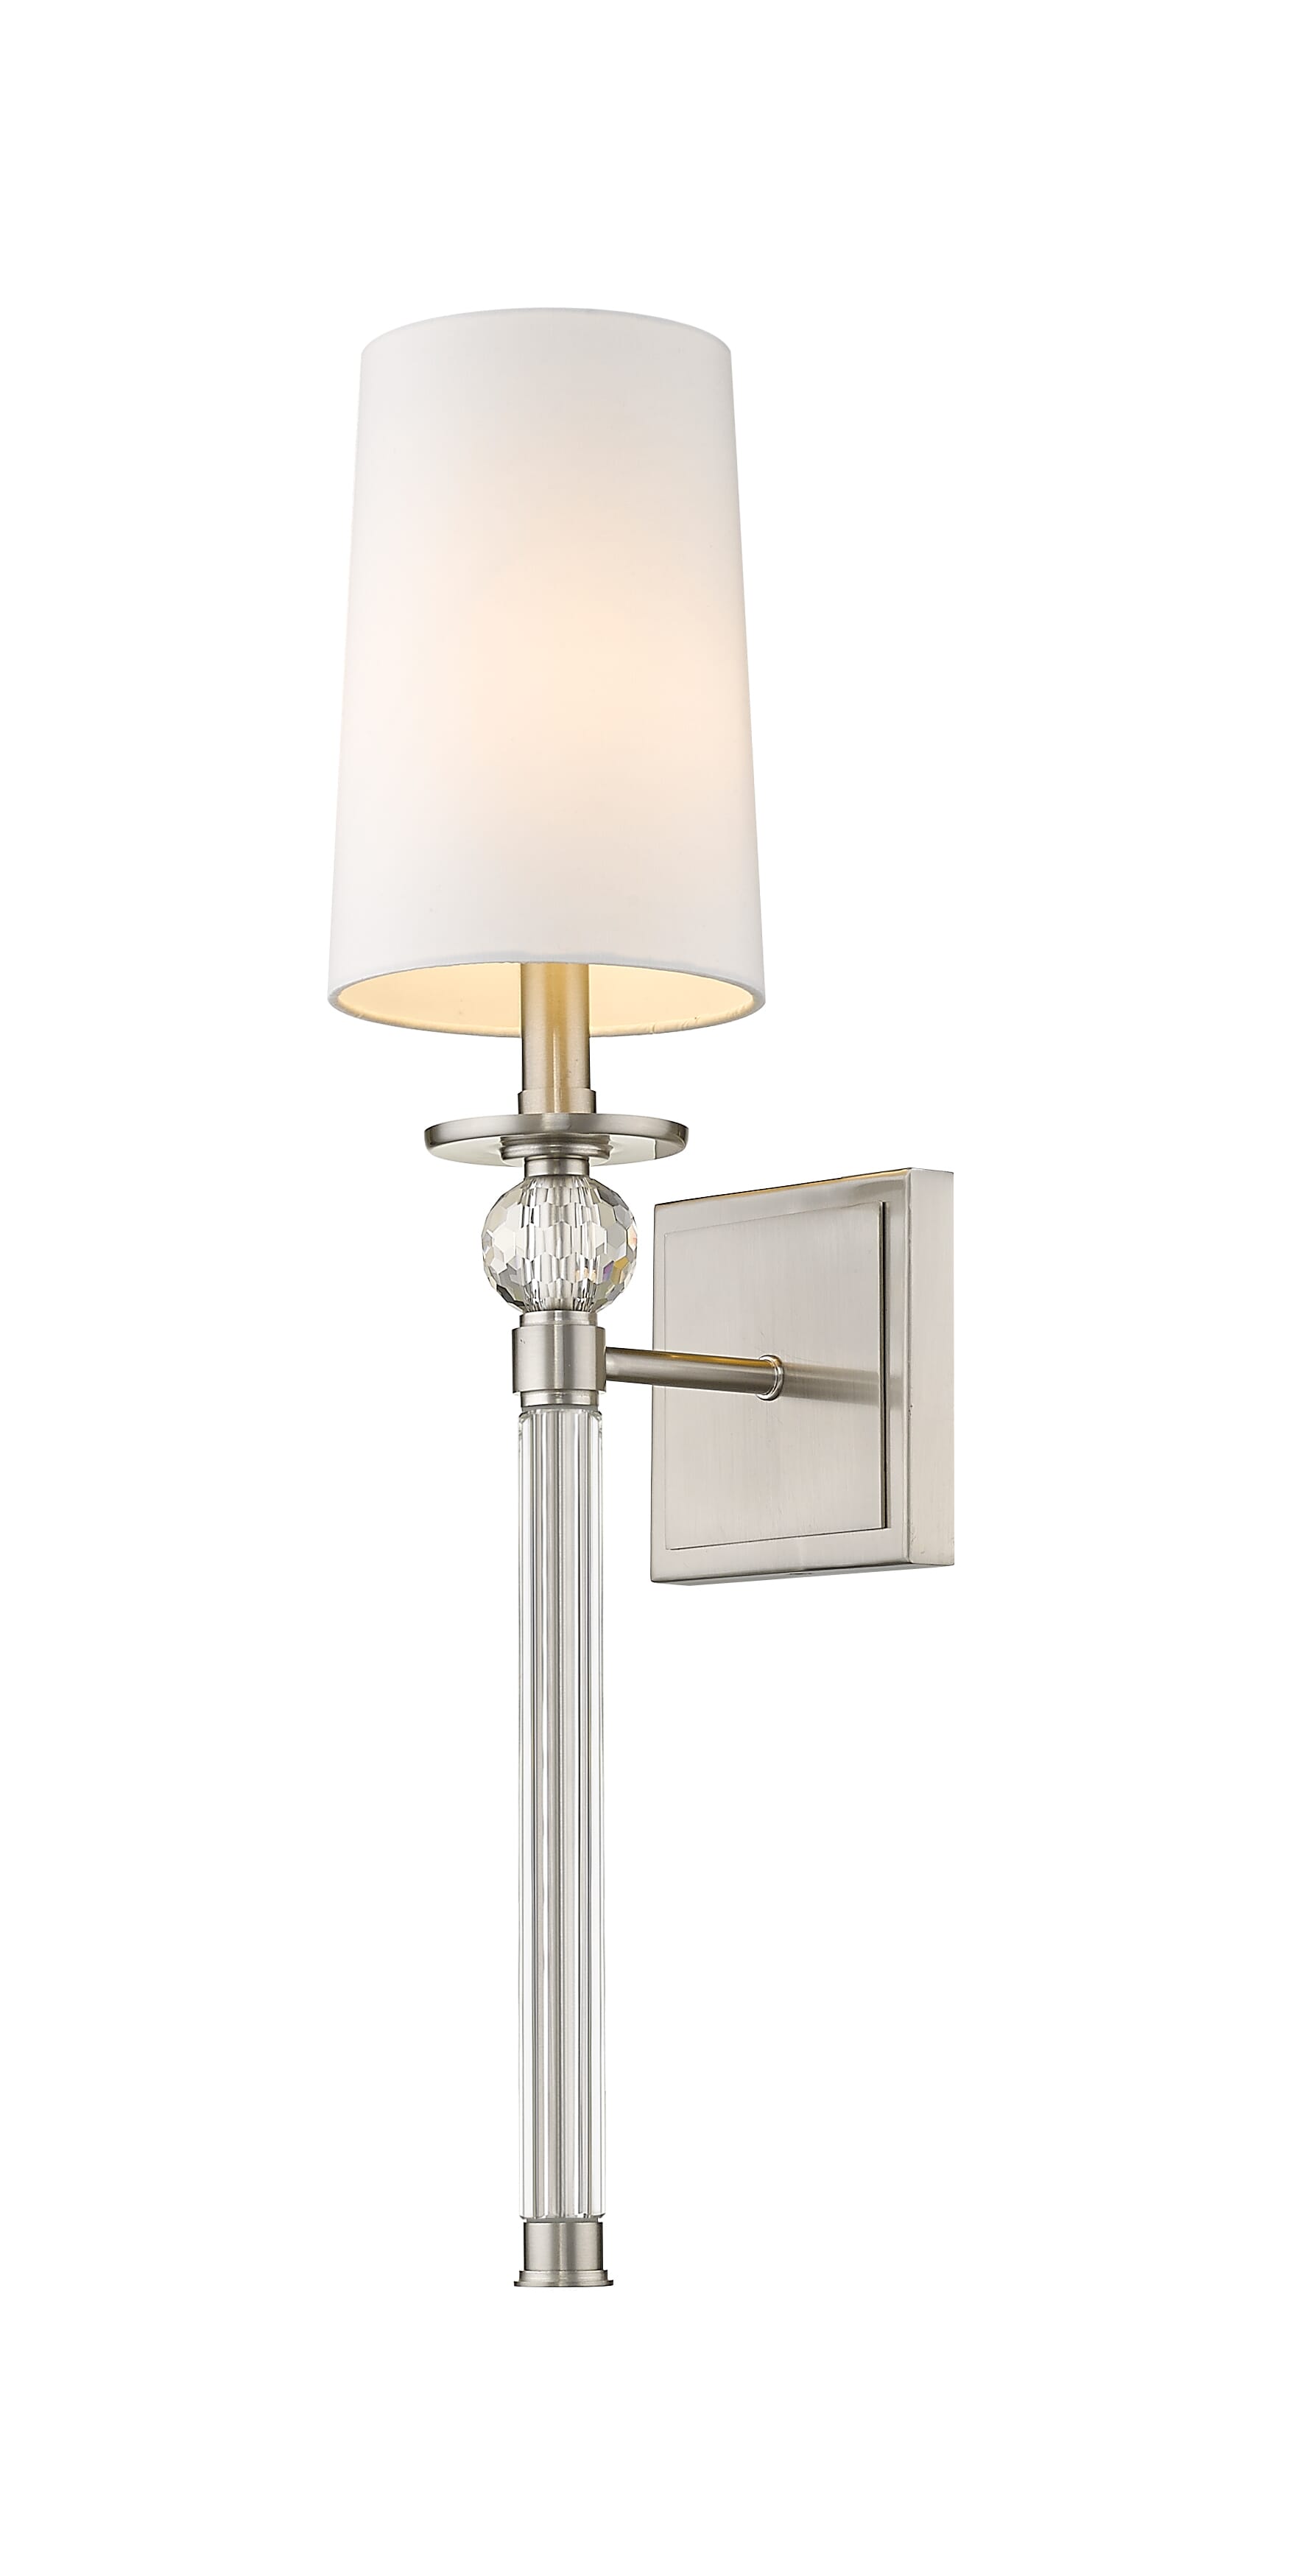 Mia 1-Light Wall Sconce In Brushed Nickel